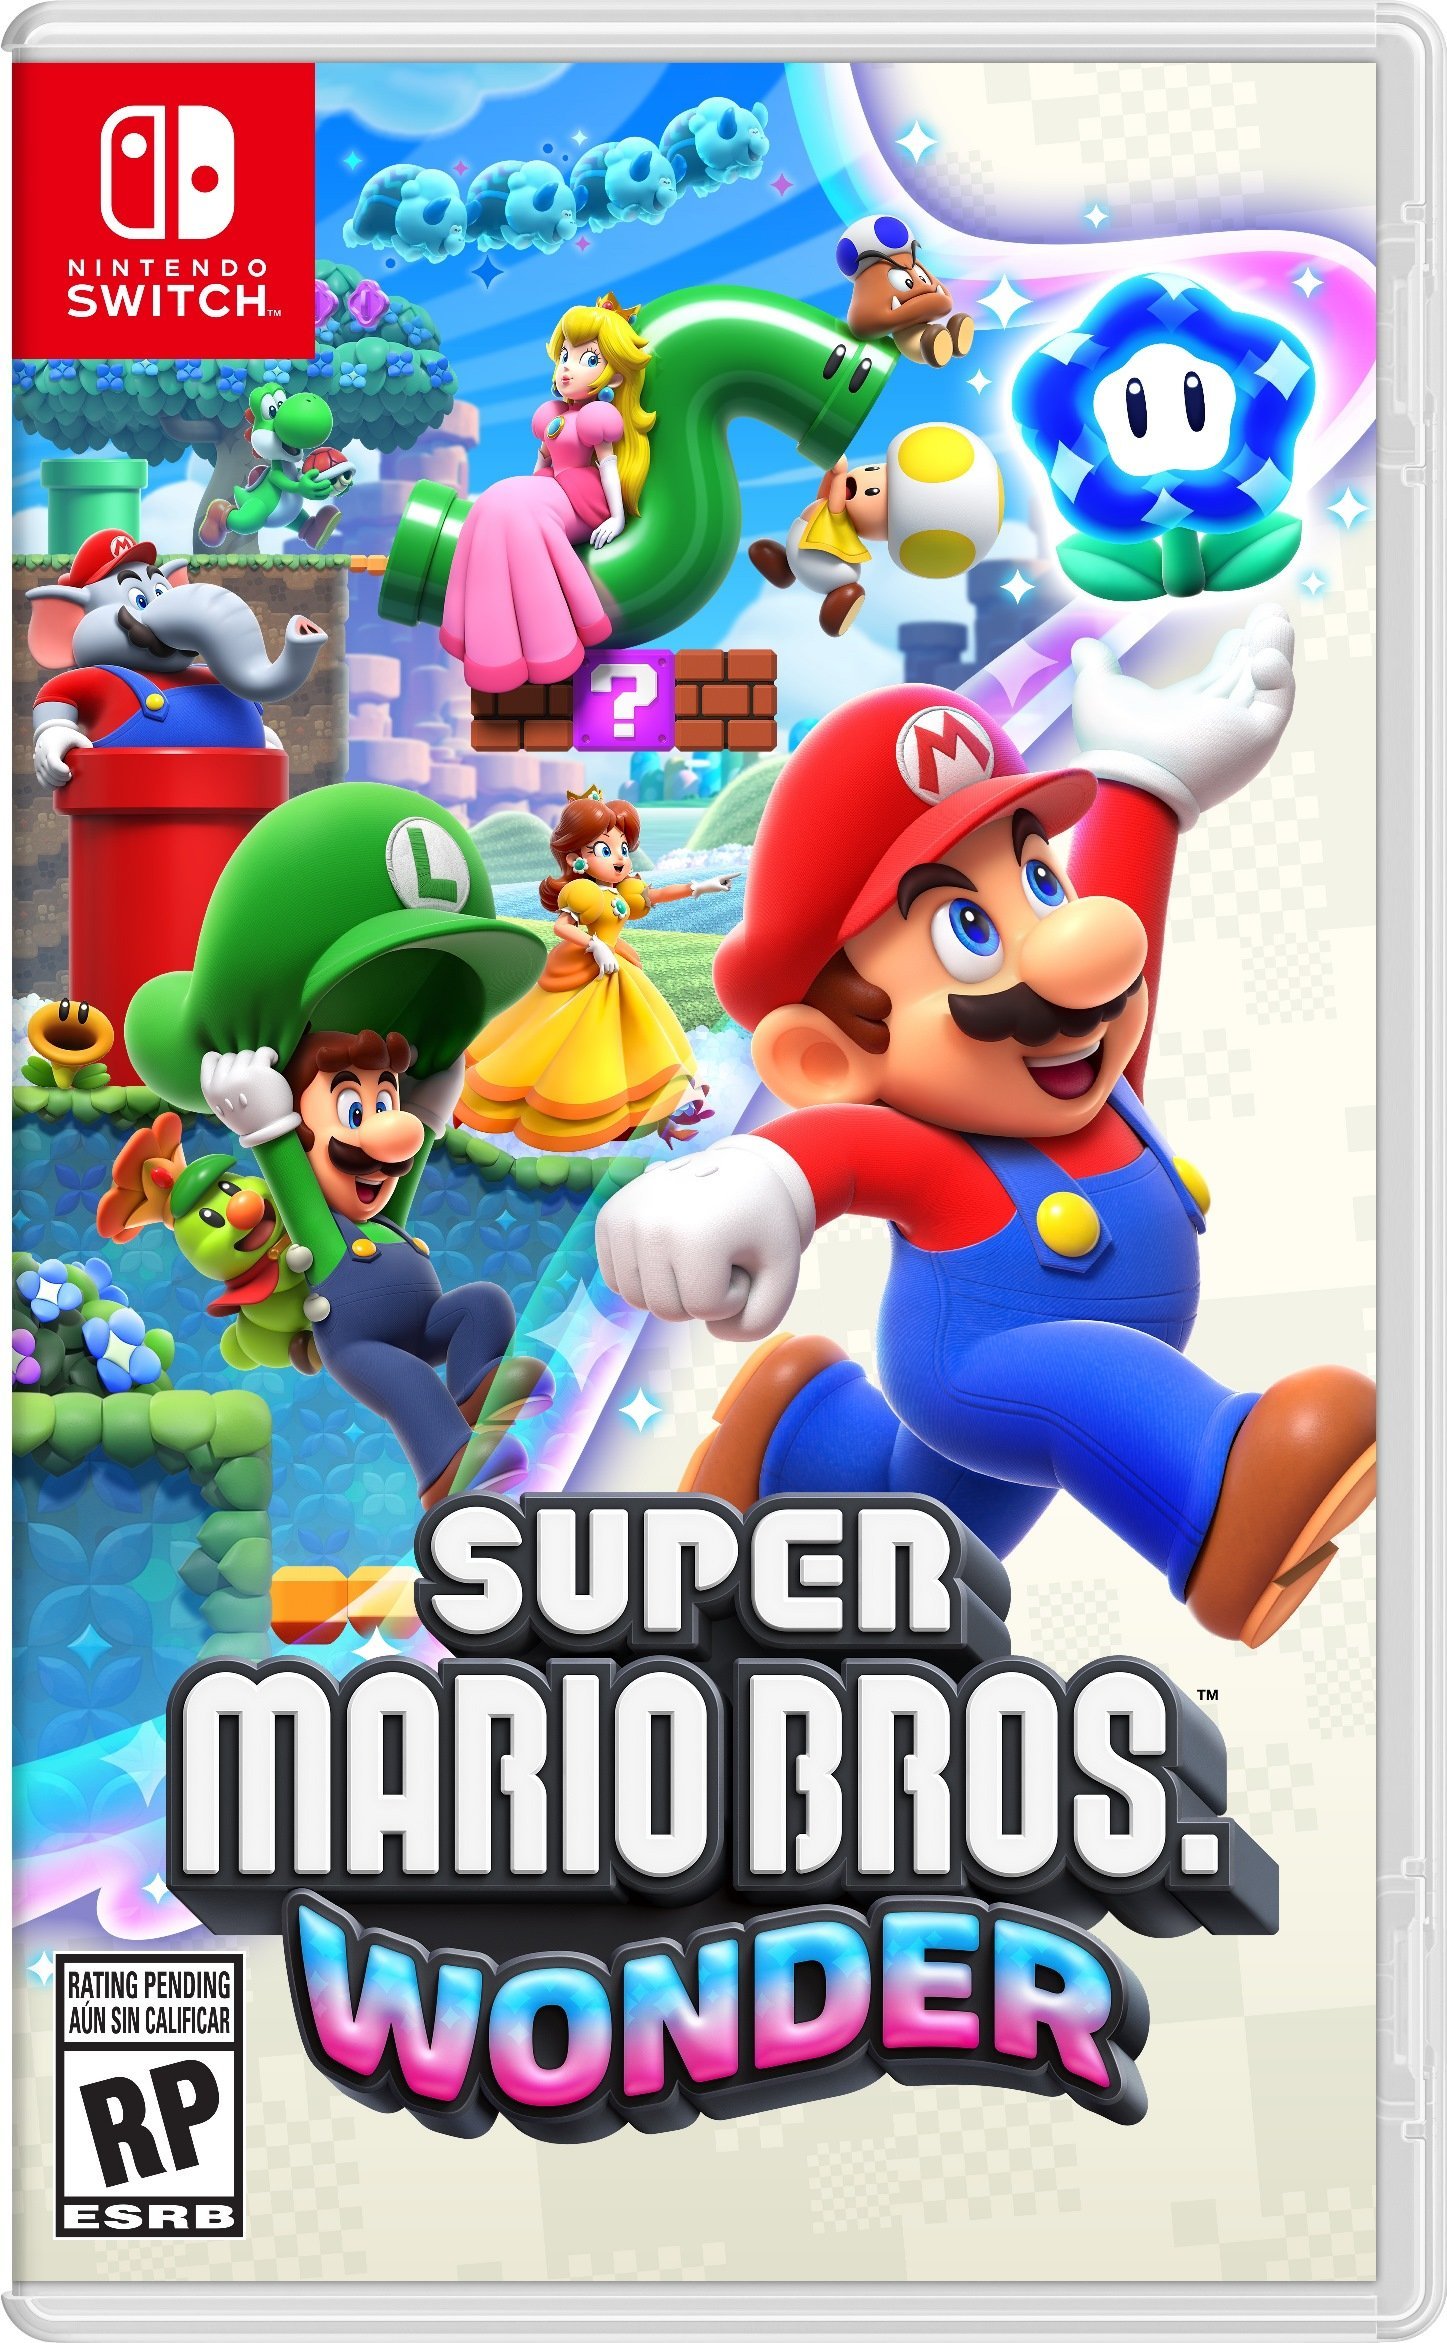 Nintendeal on X: First look at the Super Mario Bros. Wonder box art    / X